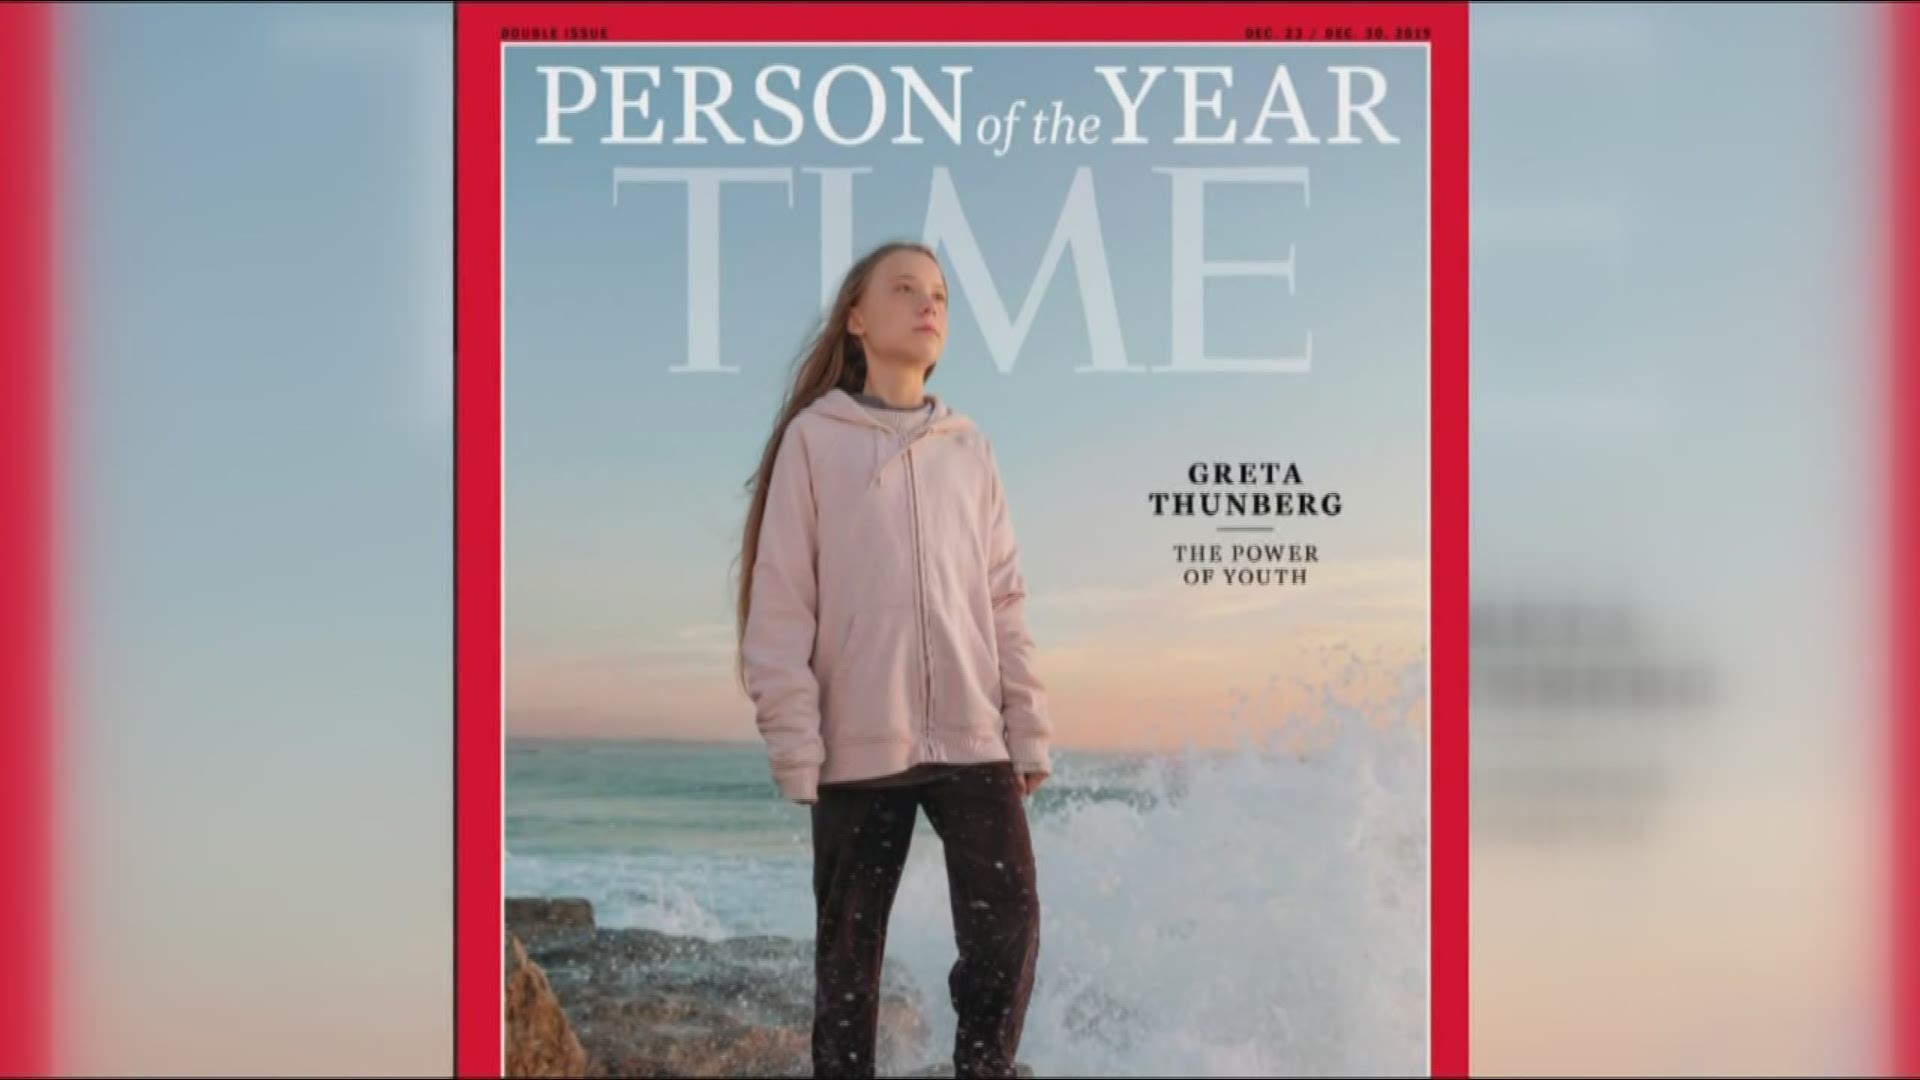 Teenager Greta Thunberg was named TIME's Person of the Year, just months after leading a climate rally in Charlotte.